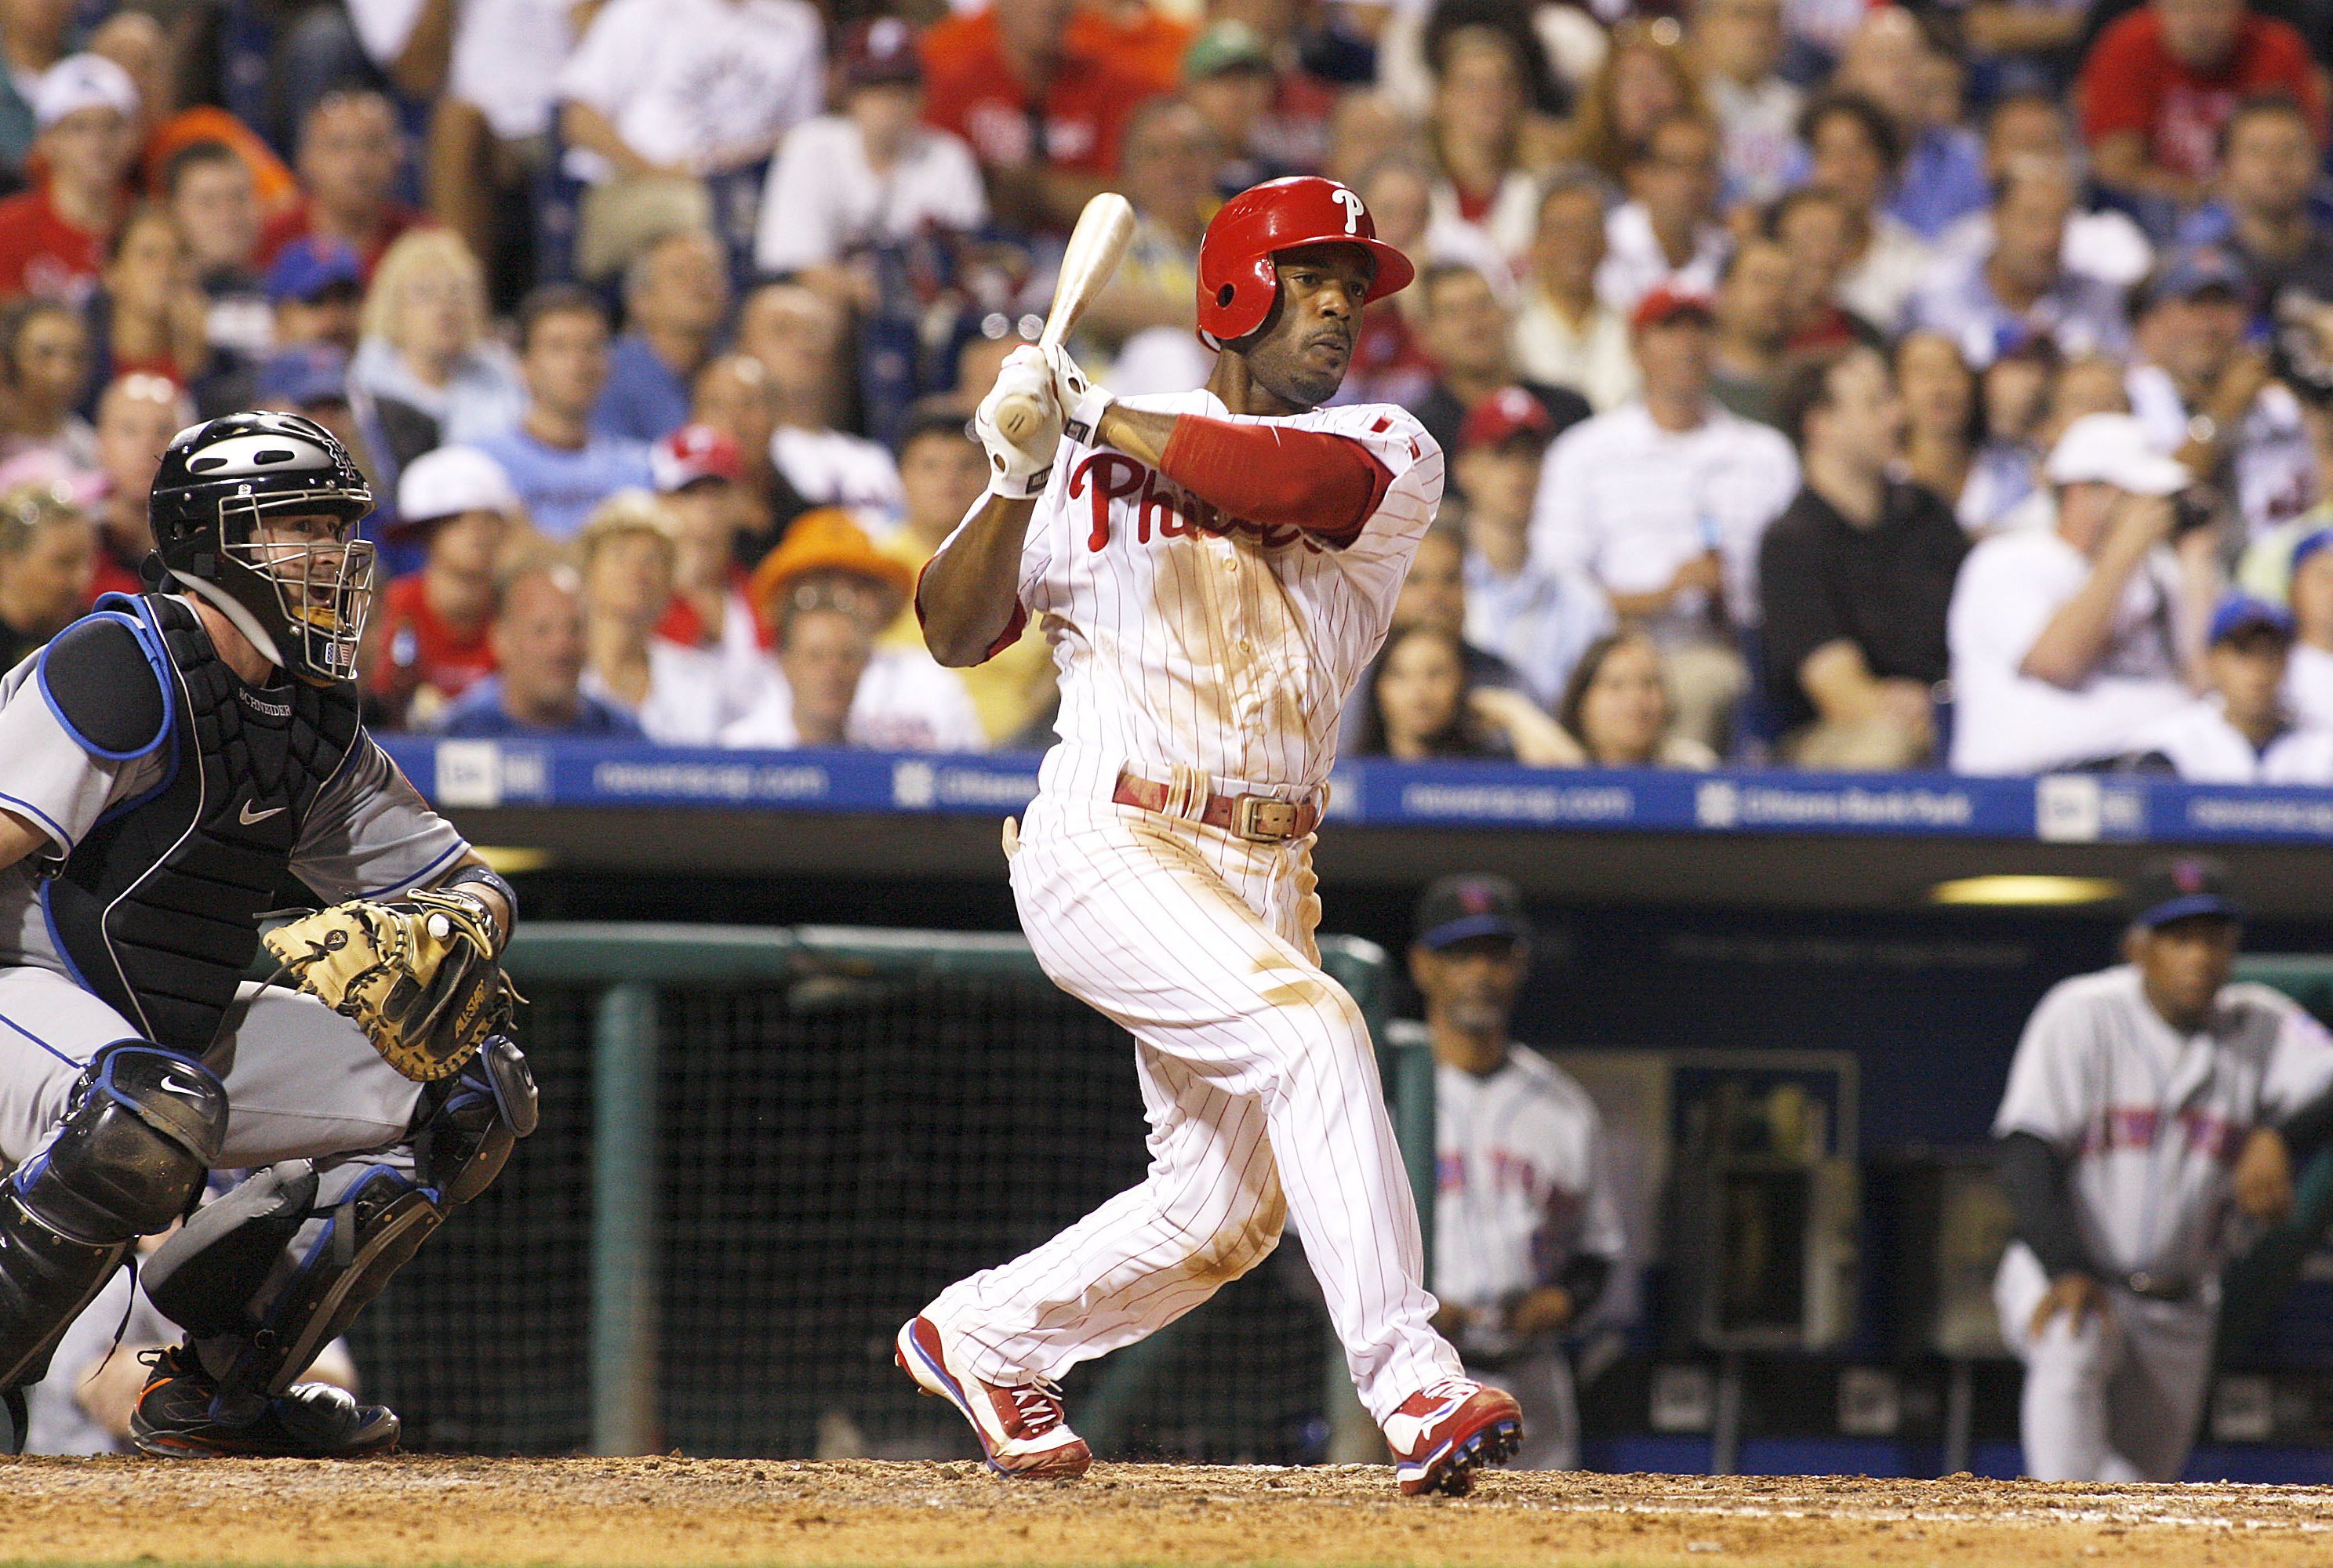 Rolen, Helton and Wagner Lead Baseball Hall of Fame Finalists